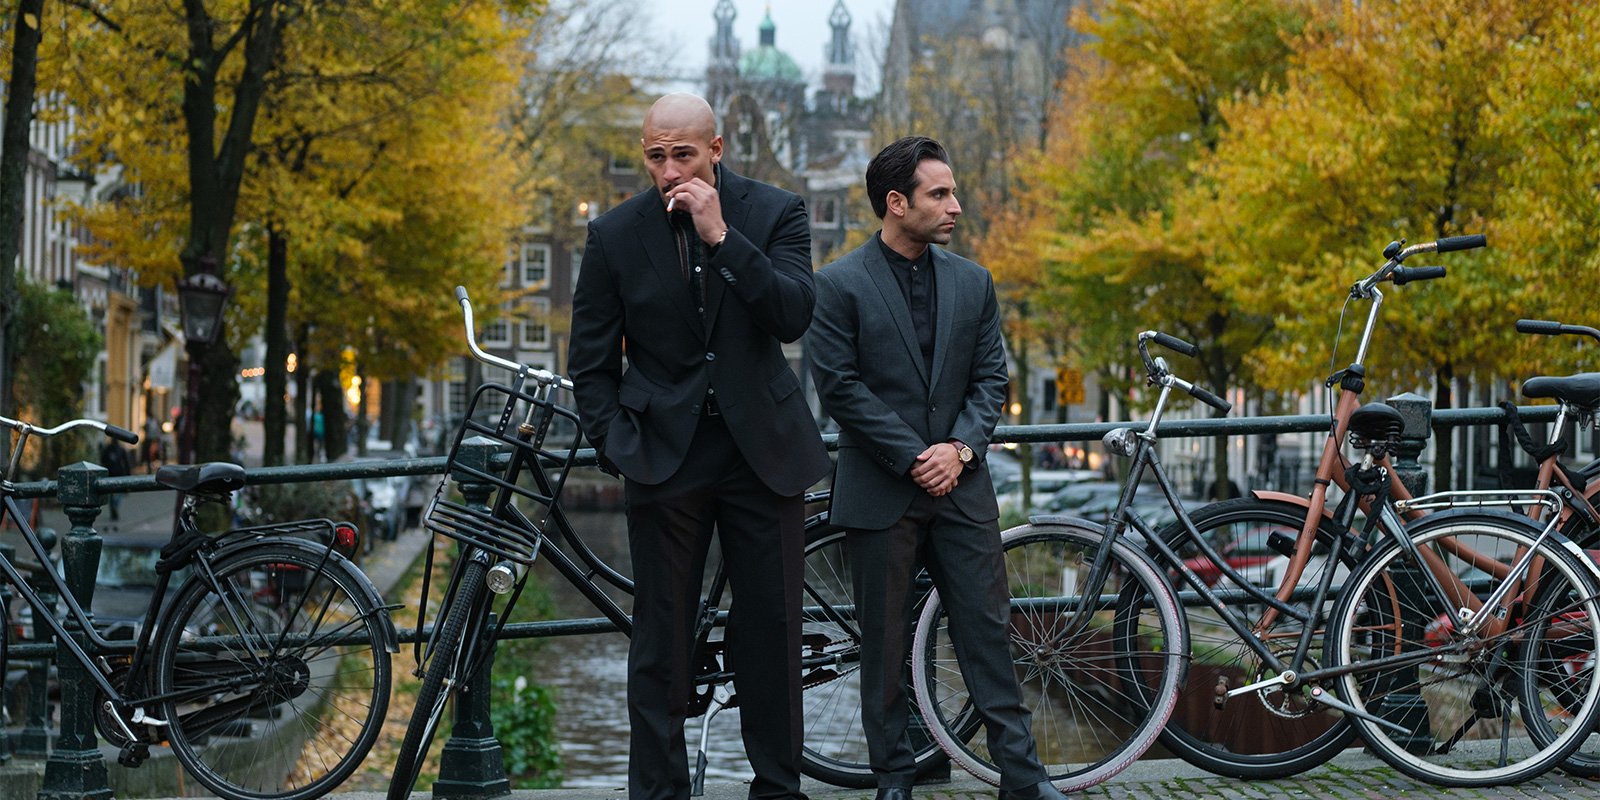 Two gangster-looking men in black suits on a small, though filled with bikes, bridge across the channel